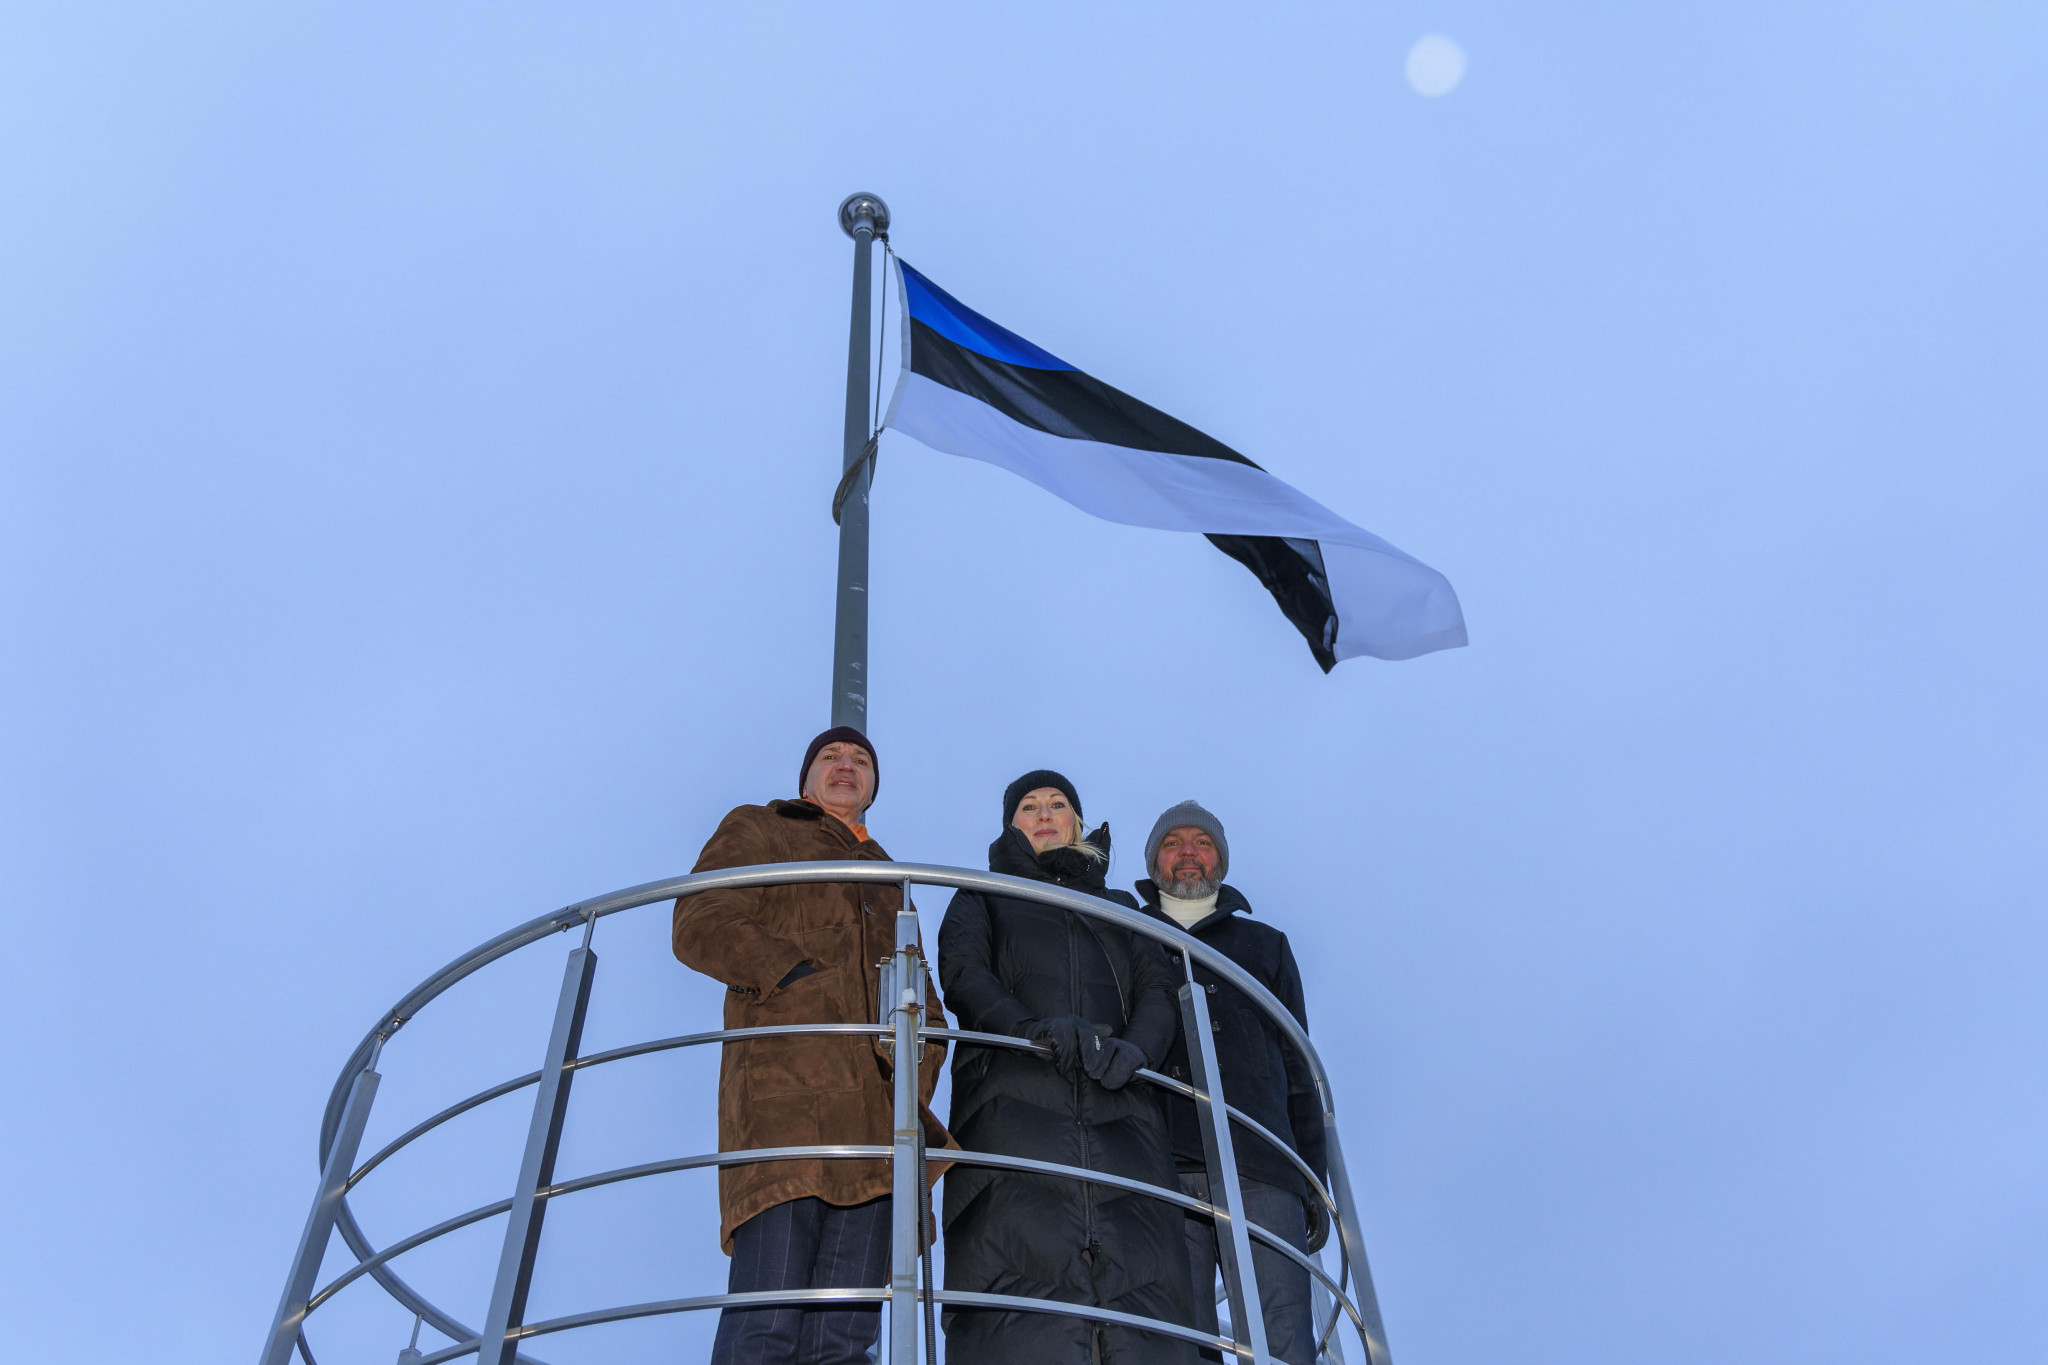 A flag was raised at Pikk Hermann Tower in Tallinn during the tribute ceremony. EOC